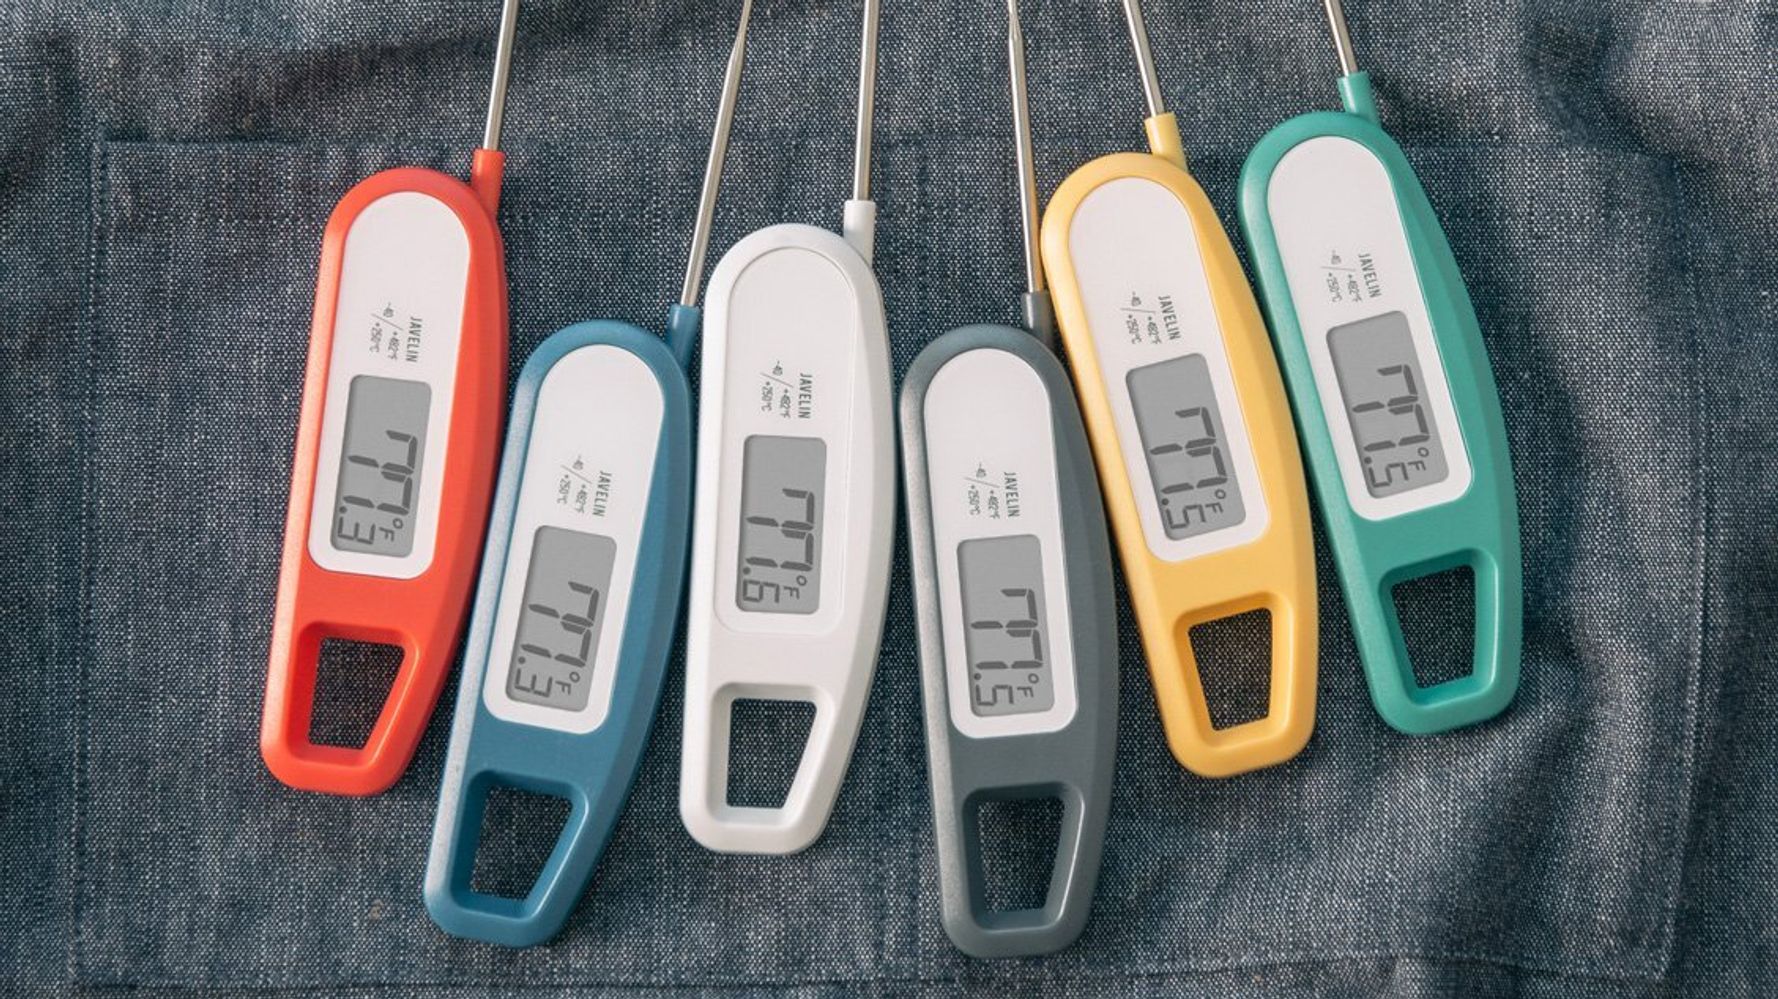 Shoppers Say You Don't Need an Expensive Meat Thermometer